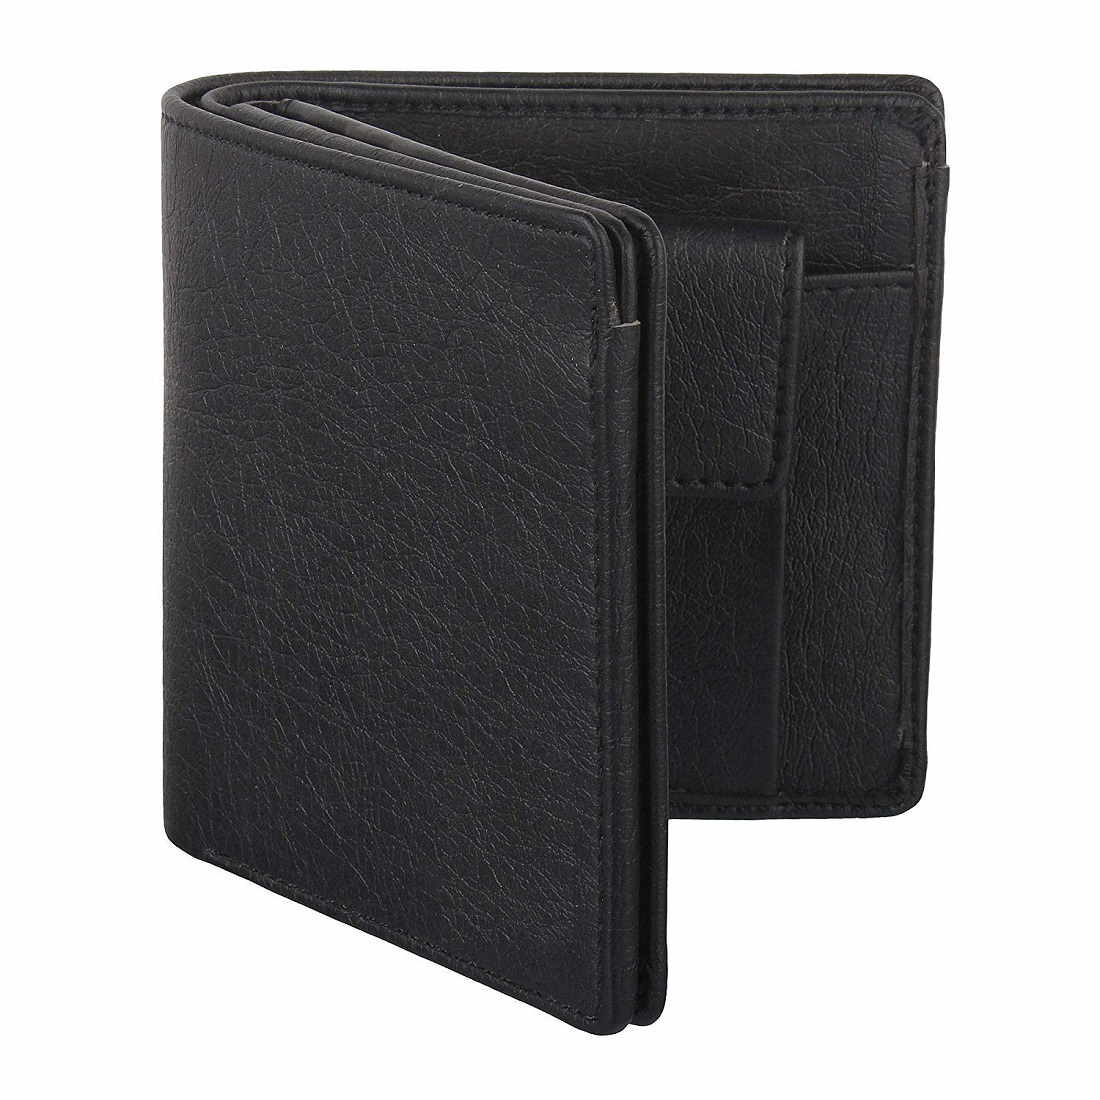 Fill Cryppies Black Men's Causal Artificial Leather Wallet  FC MW 020 